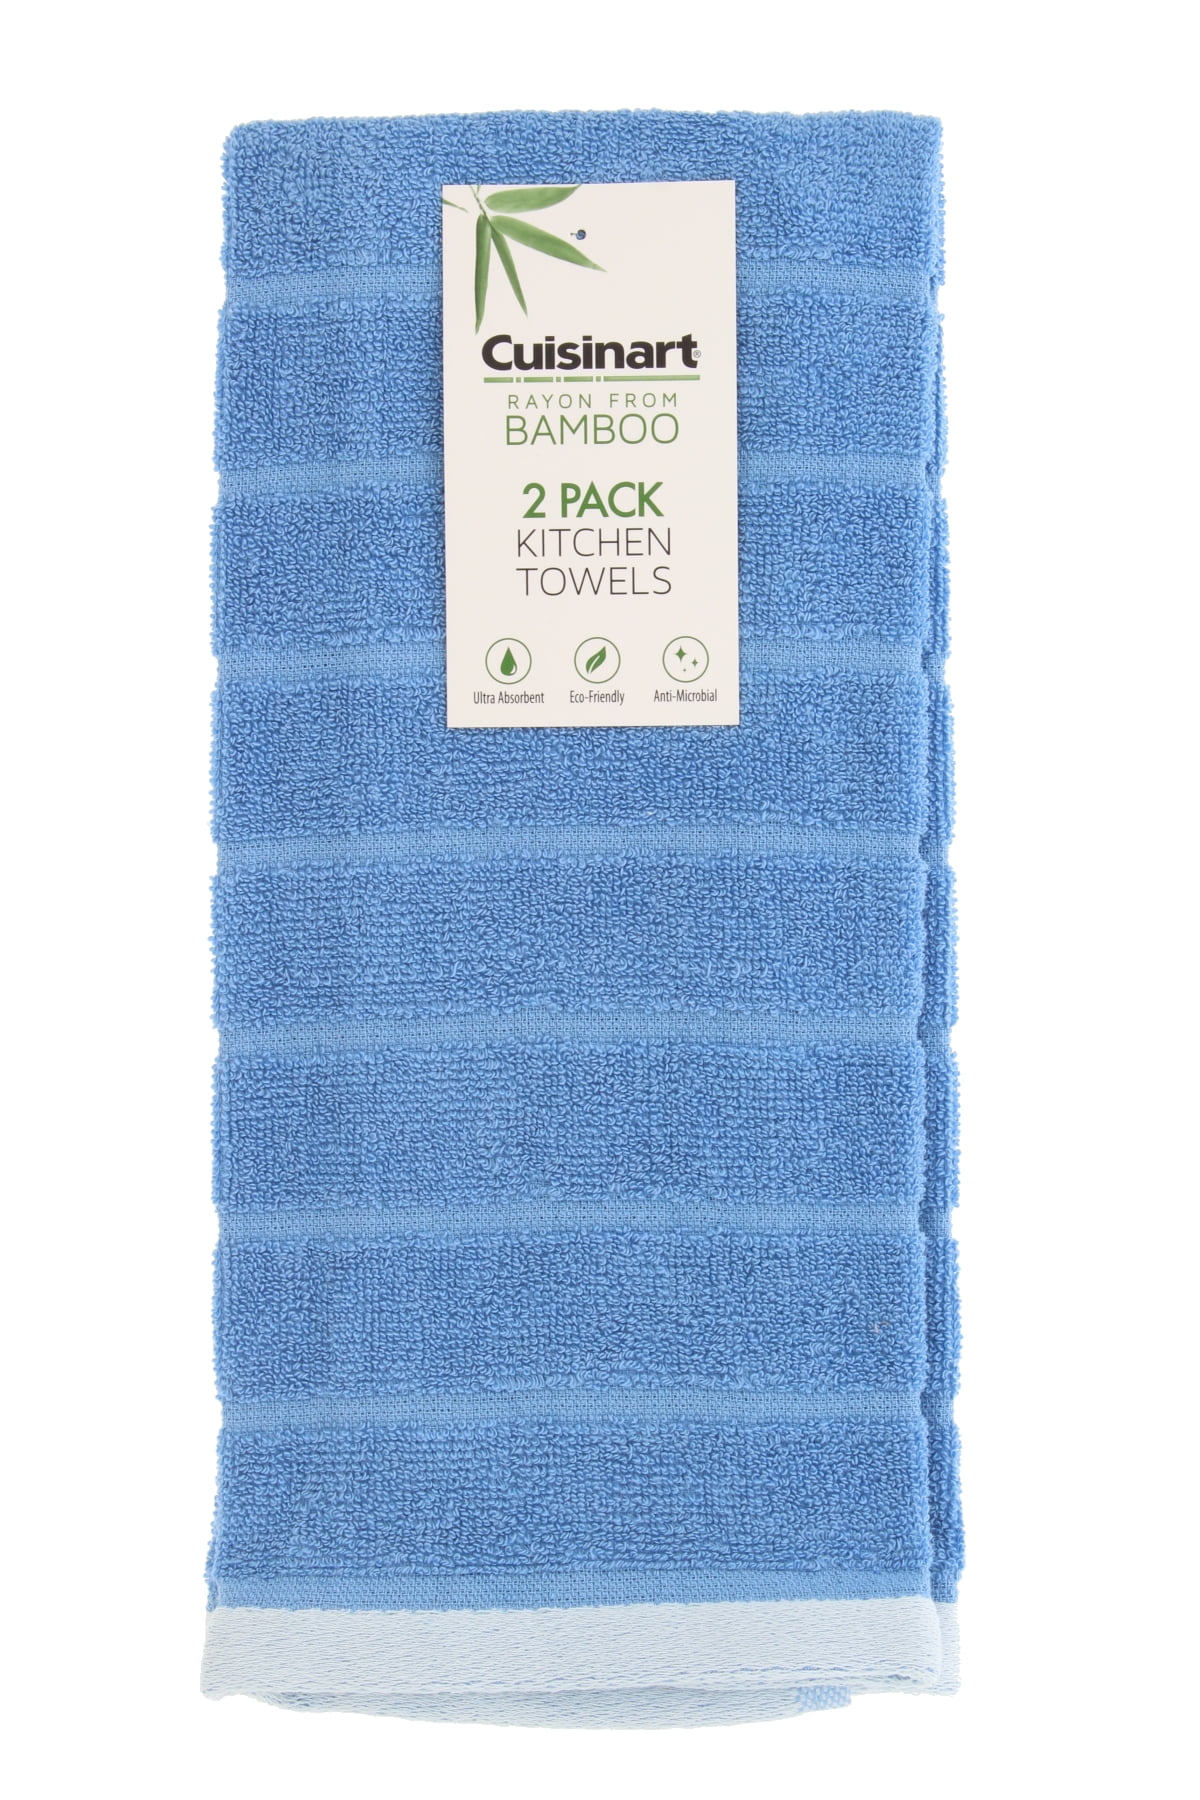 Cuisinart set of 2 kitchen towels rayon from bamboo eco-friendly absorbent 